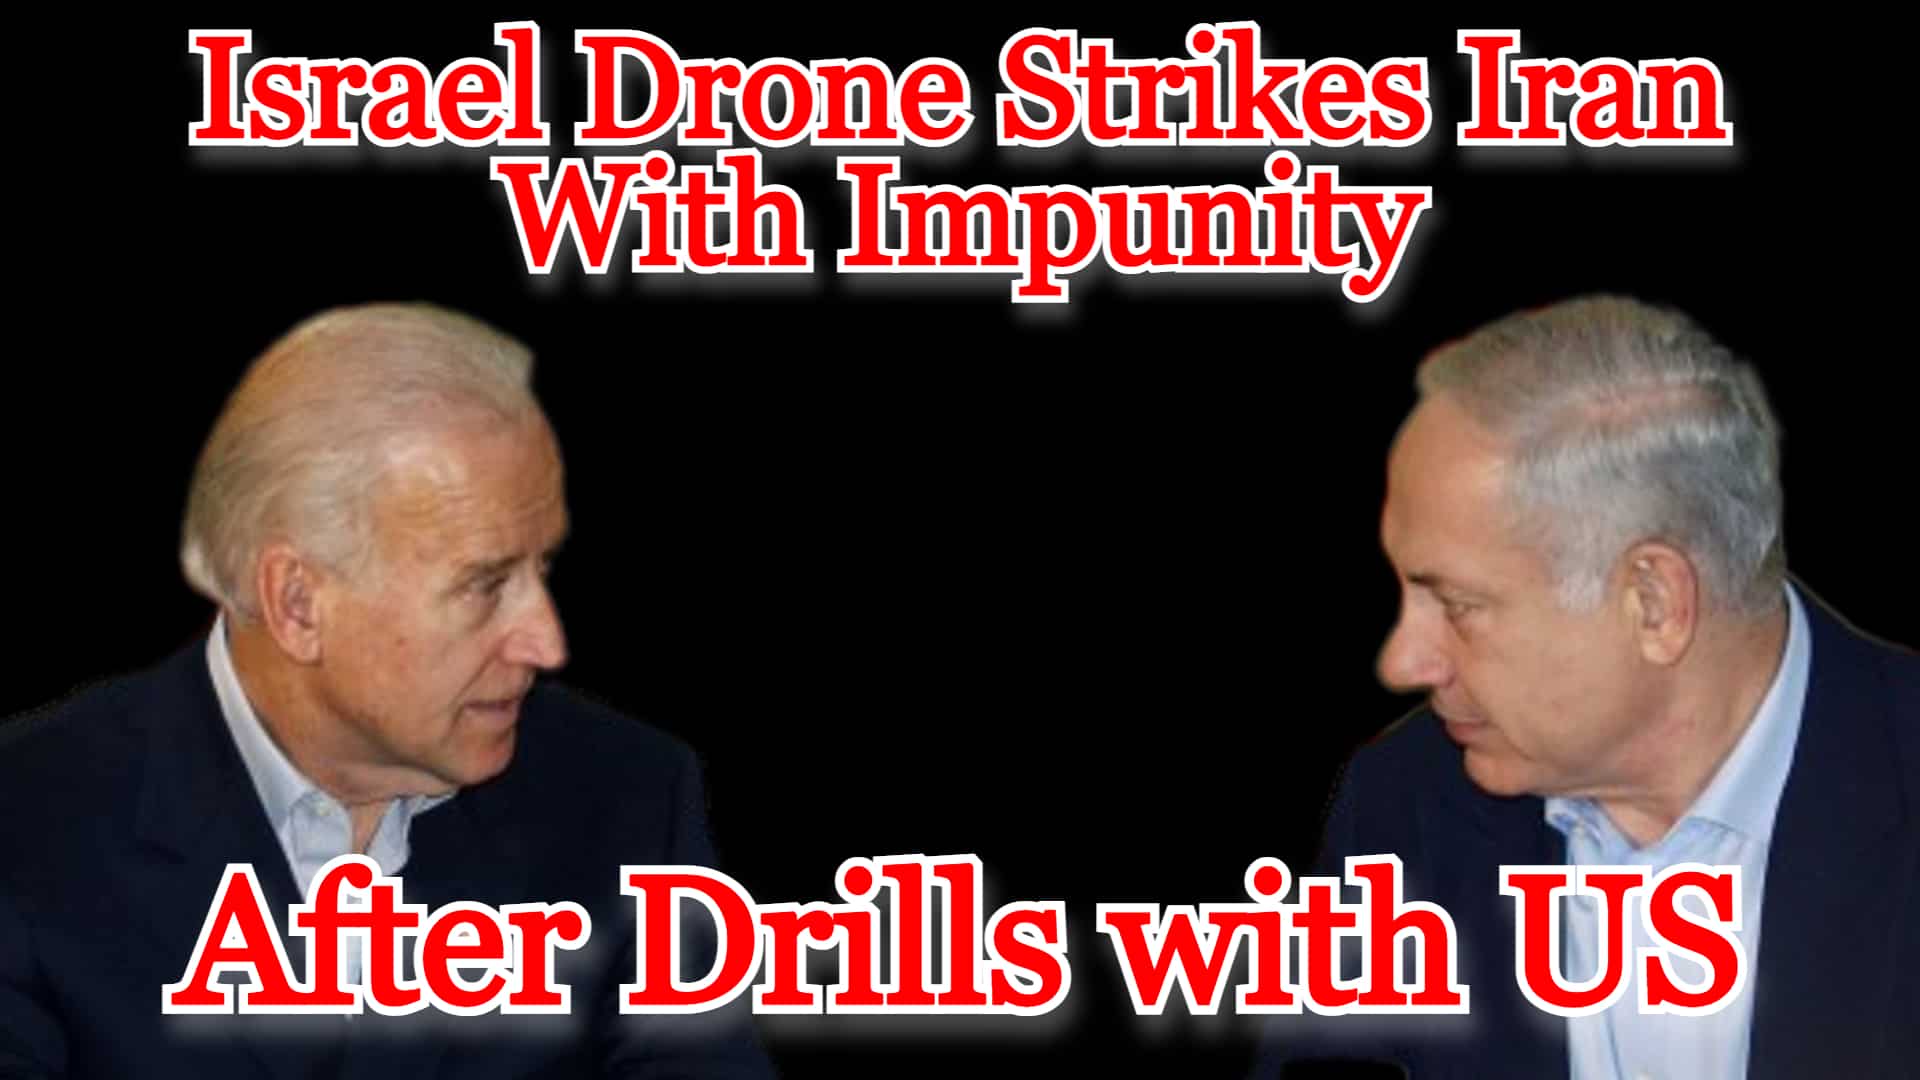 COI #379: Israel Drone Strikes Iran With Impunity, After Drills with US